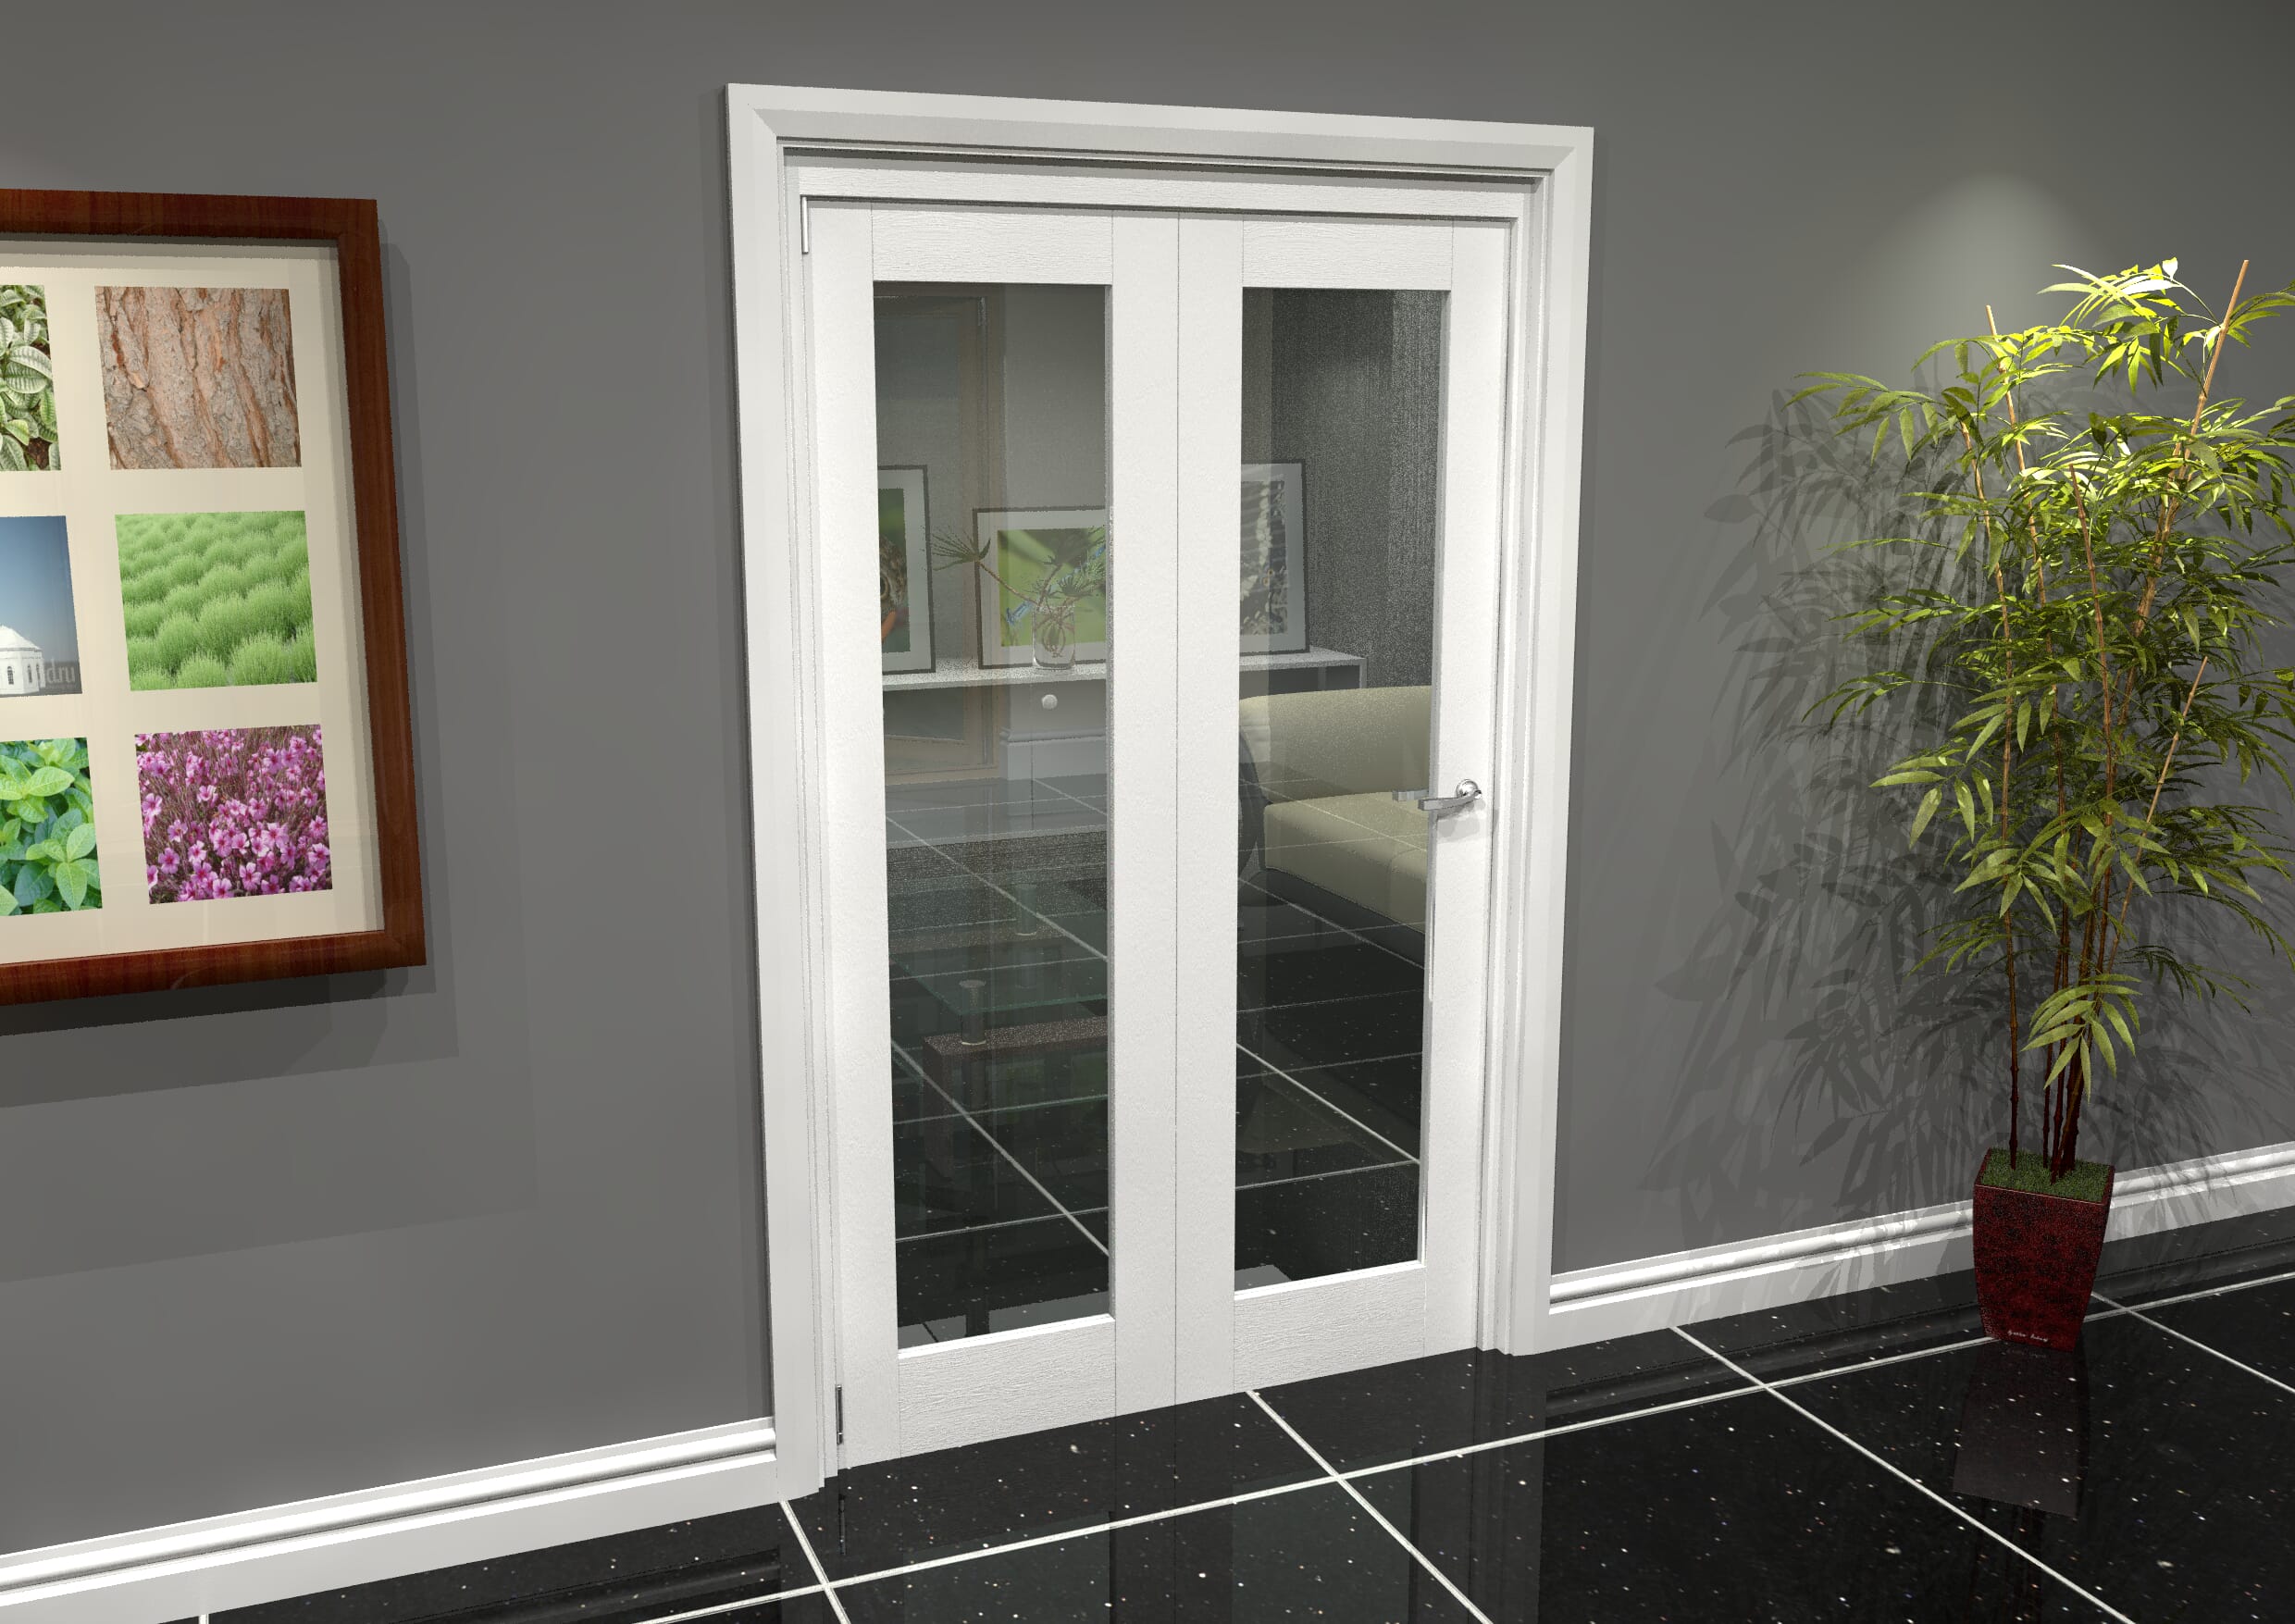 1231 x 2070 White Primed Internal Folding door system with Clear Glass